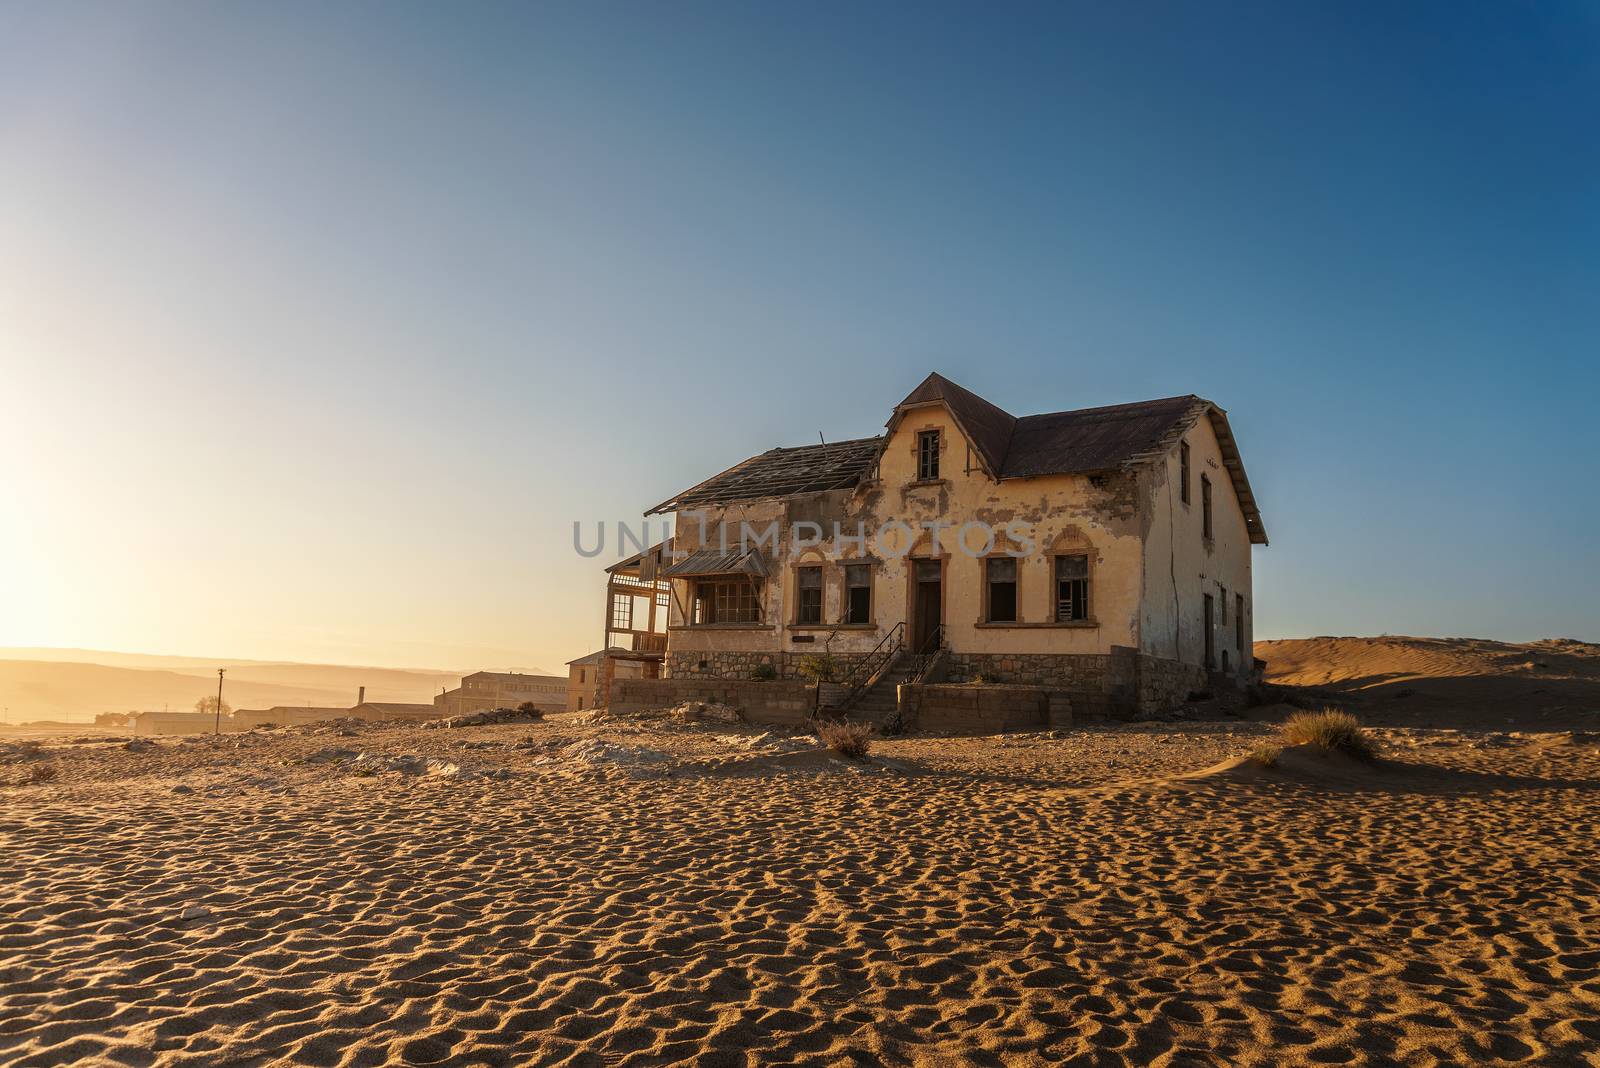 Sunrise above an abandoned house in Kolmanskop ghost town located in southern Namibia near the town of Luderitz.